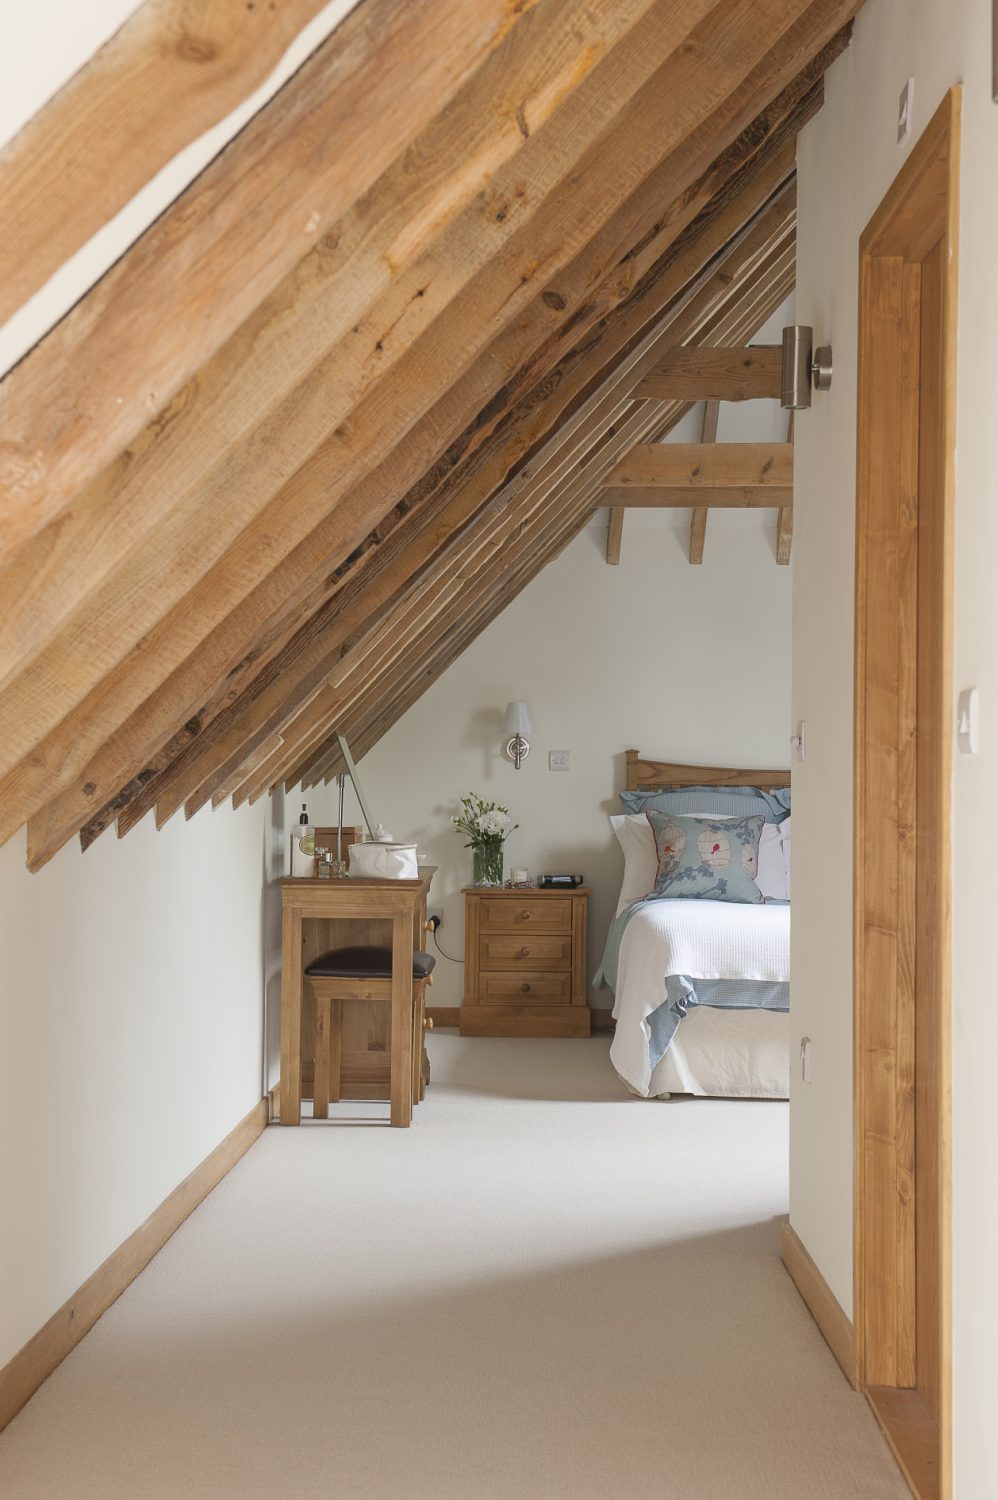 Above, the master bedroom and en suite nestles in the eaves of the building